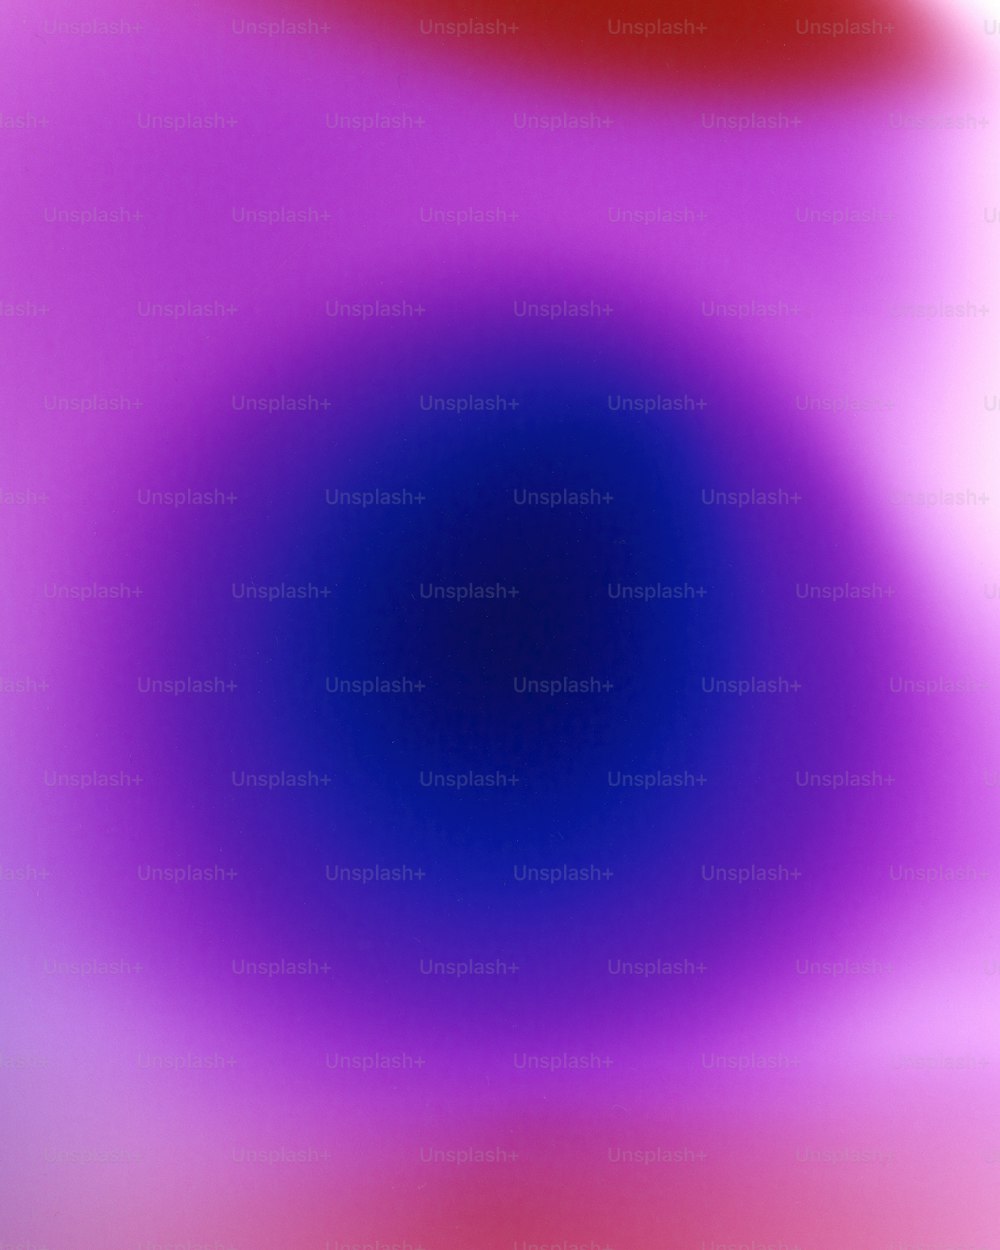 a blurry image of a red and blue circle